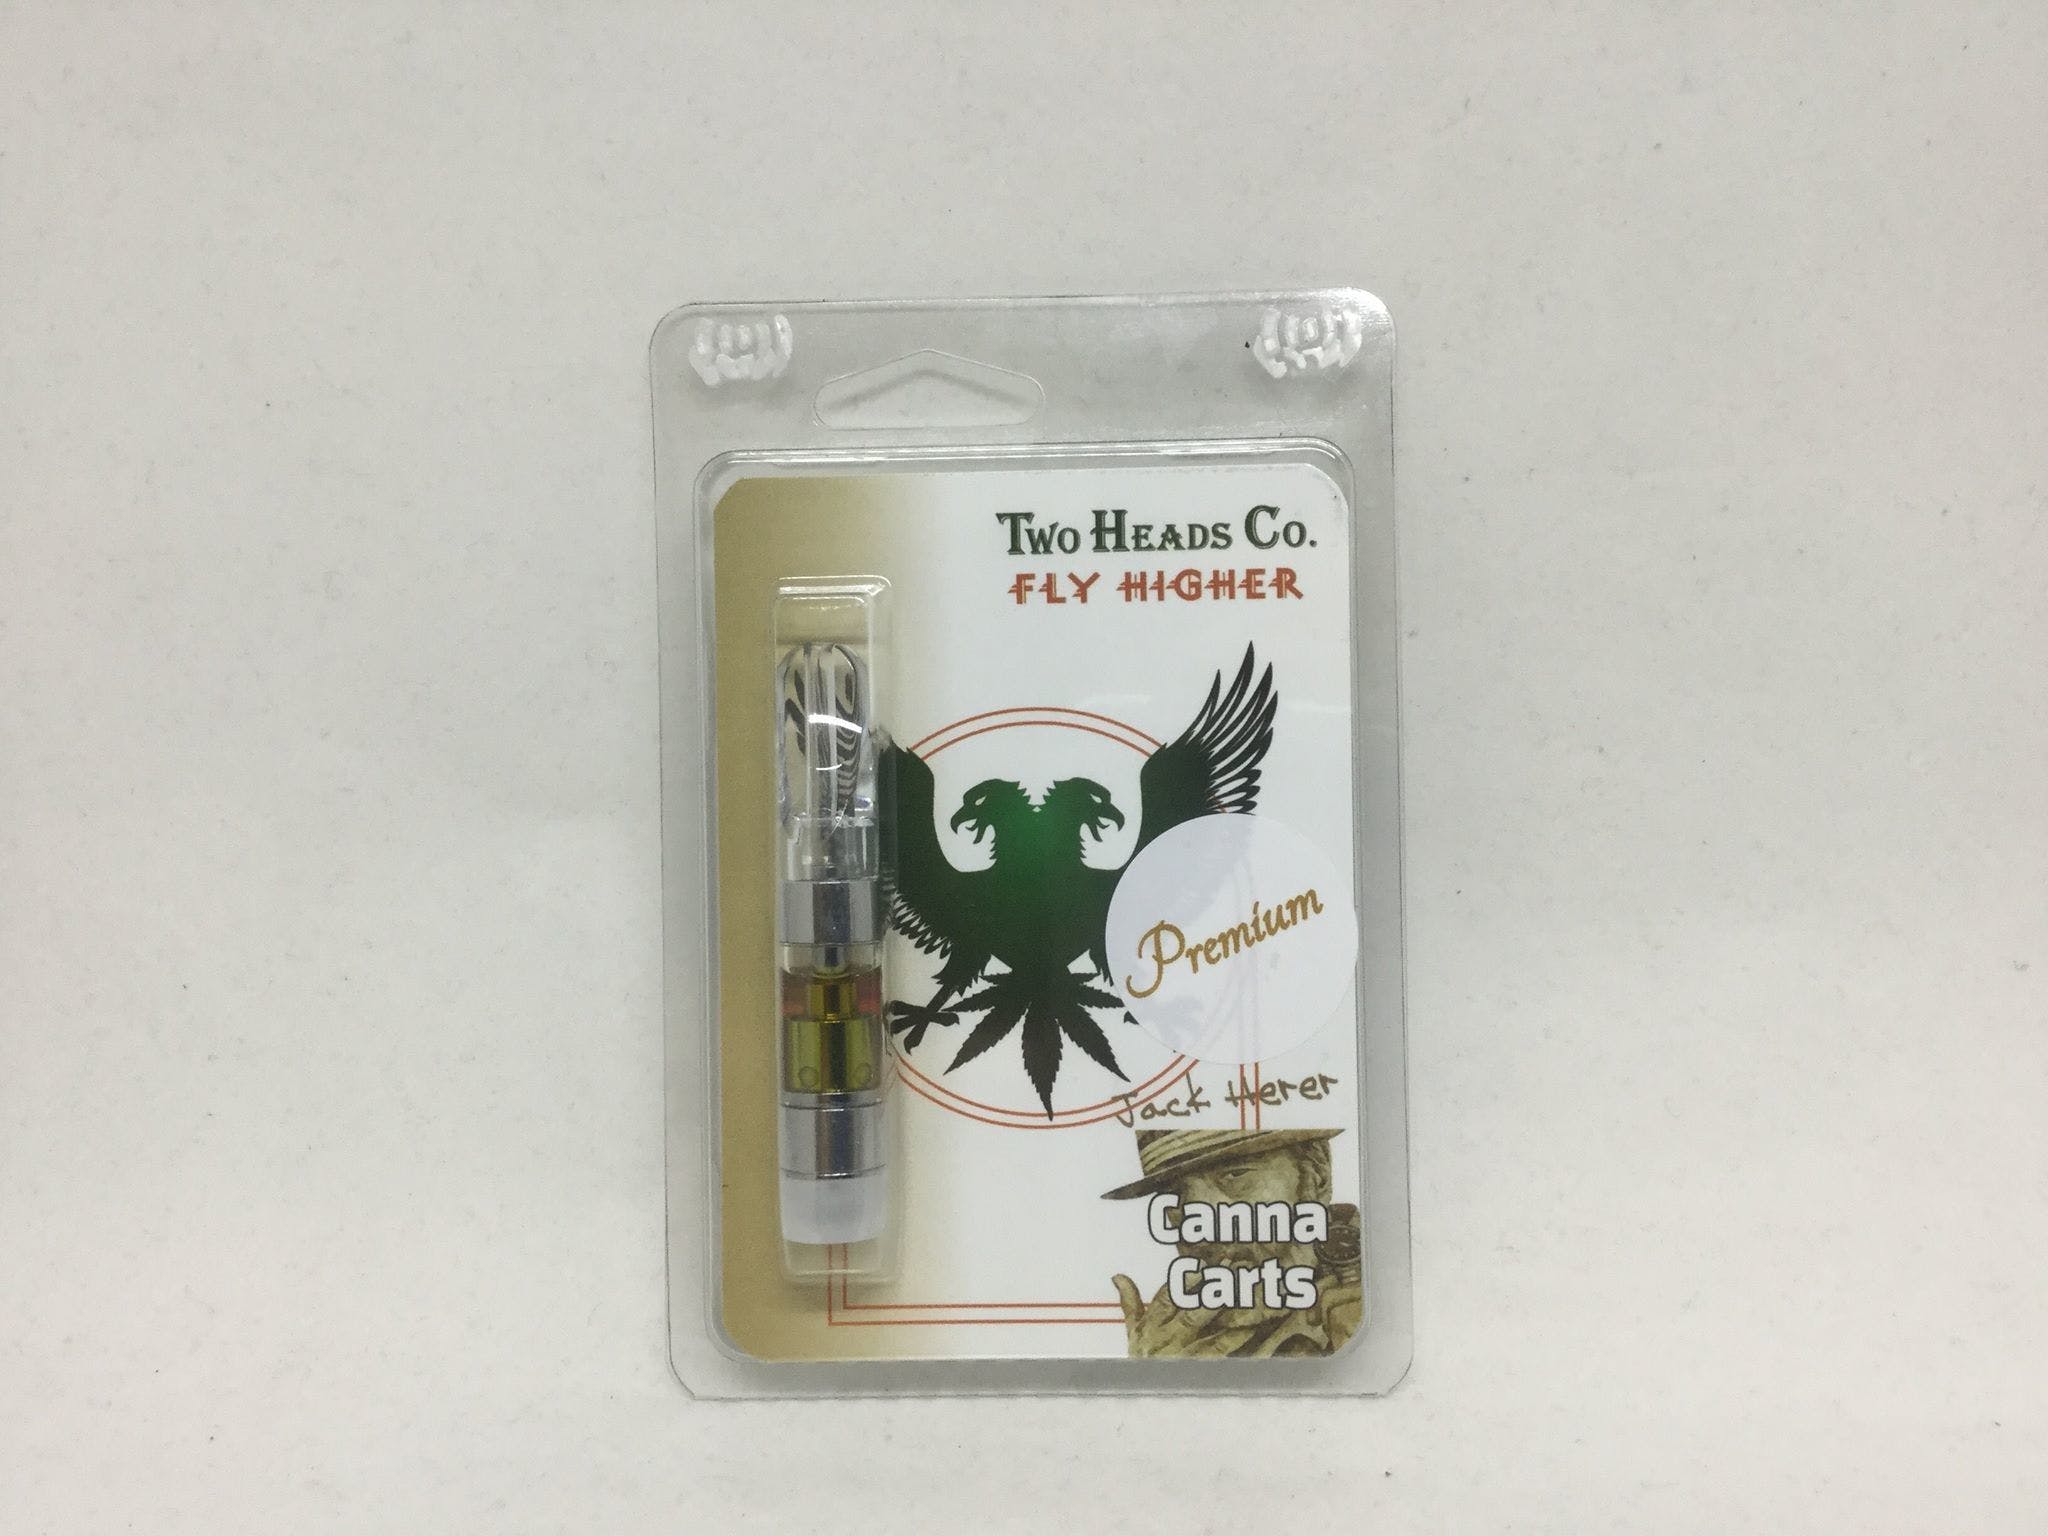 concentrate-two-heads-jack-herer-cartridge